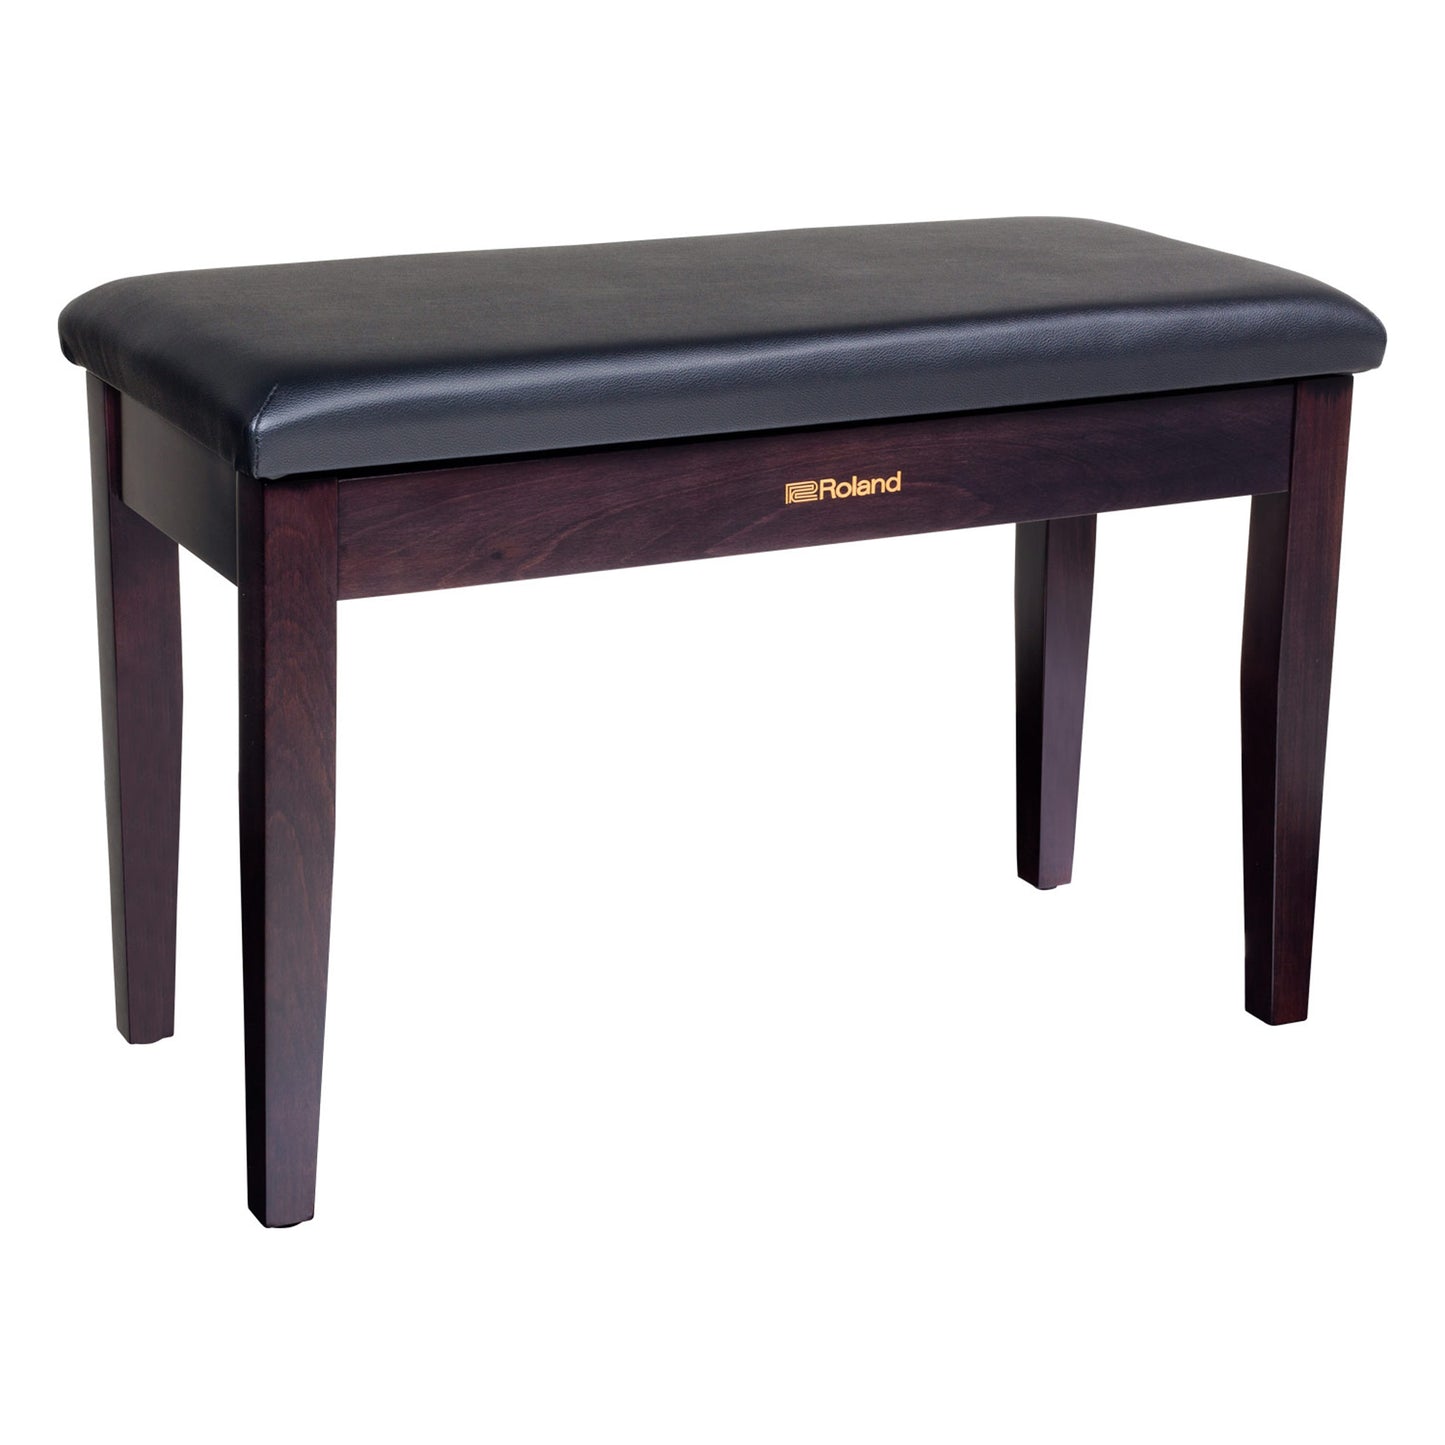 Roland RPB-D100RW Duet Piano Bench with Storage Compartment - Rosewood